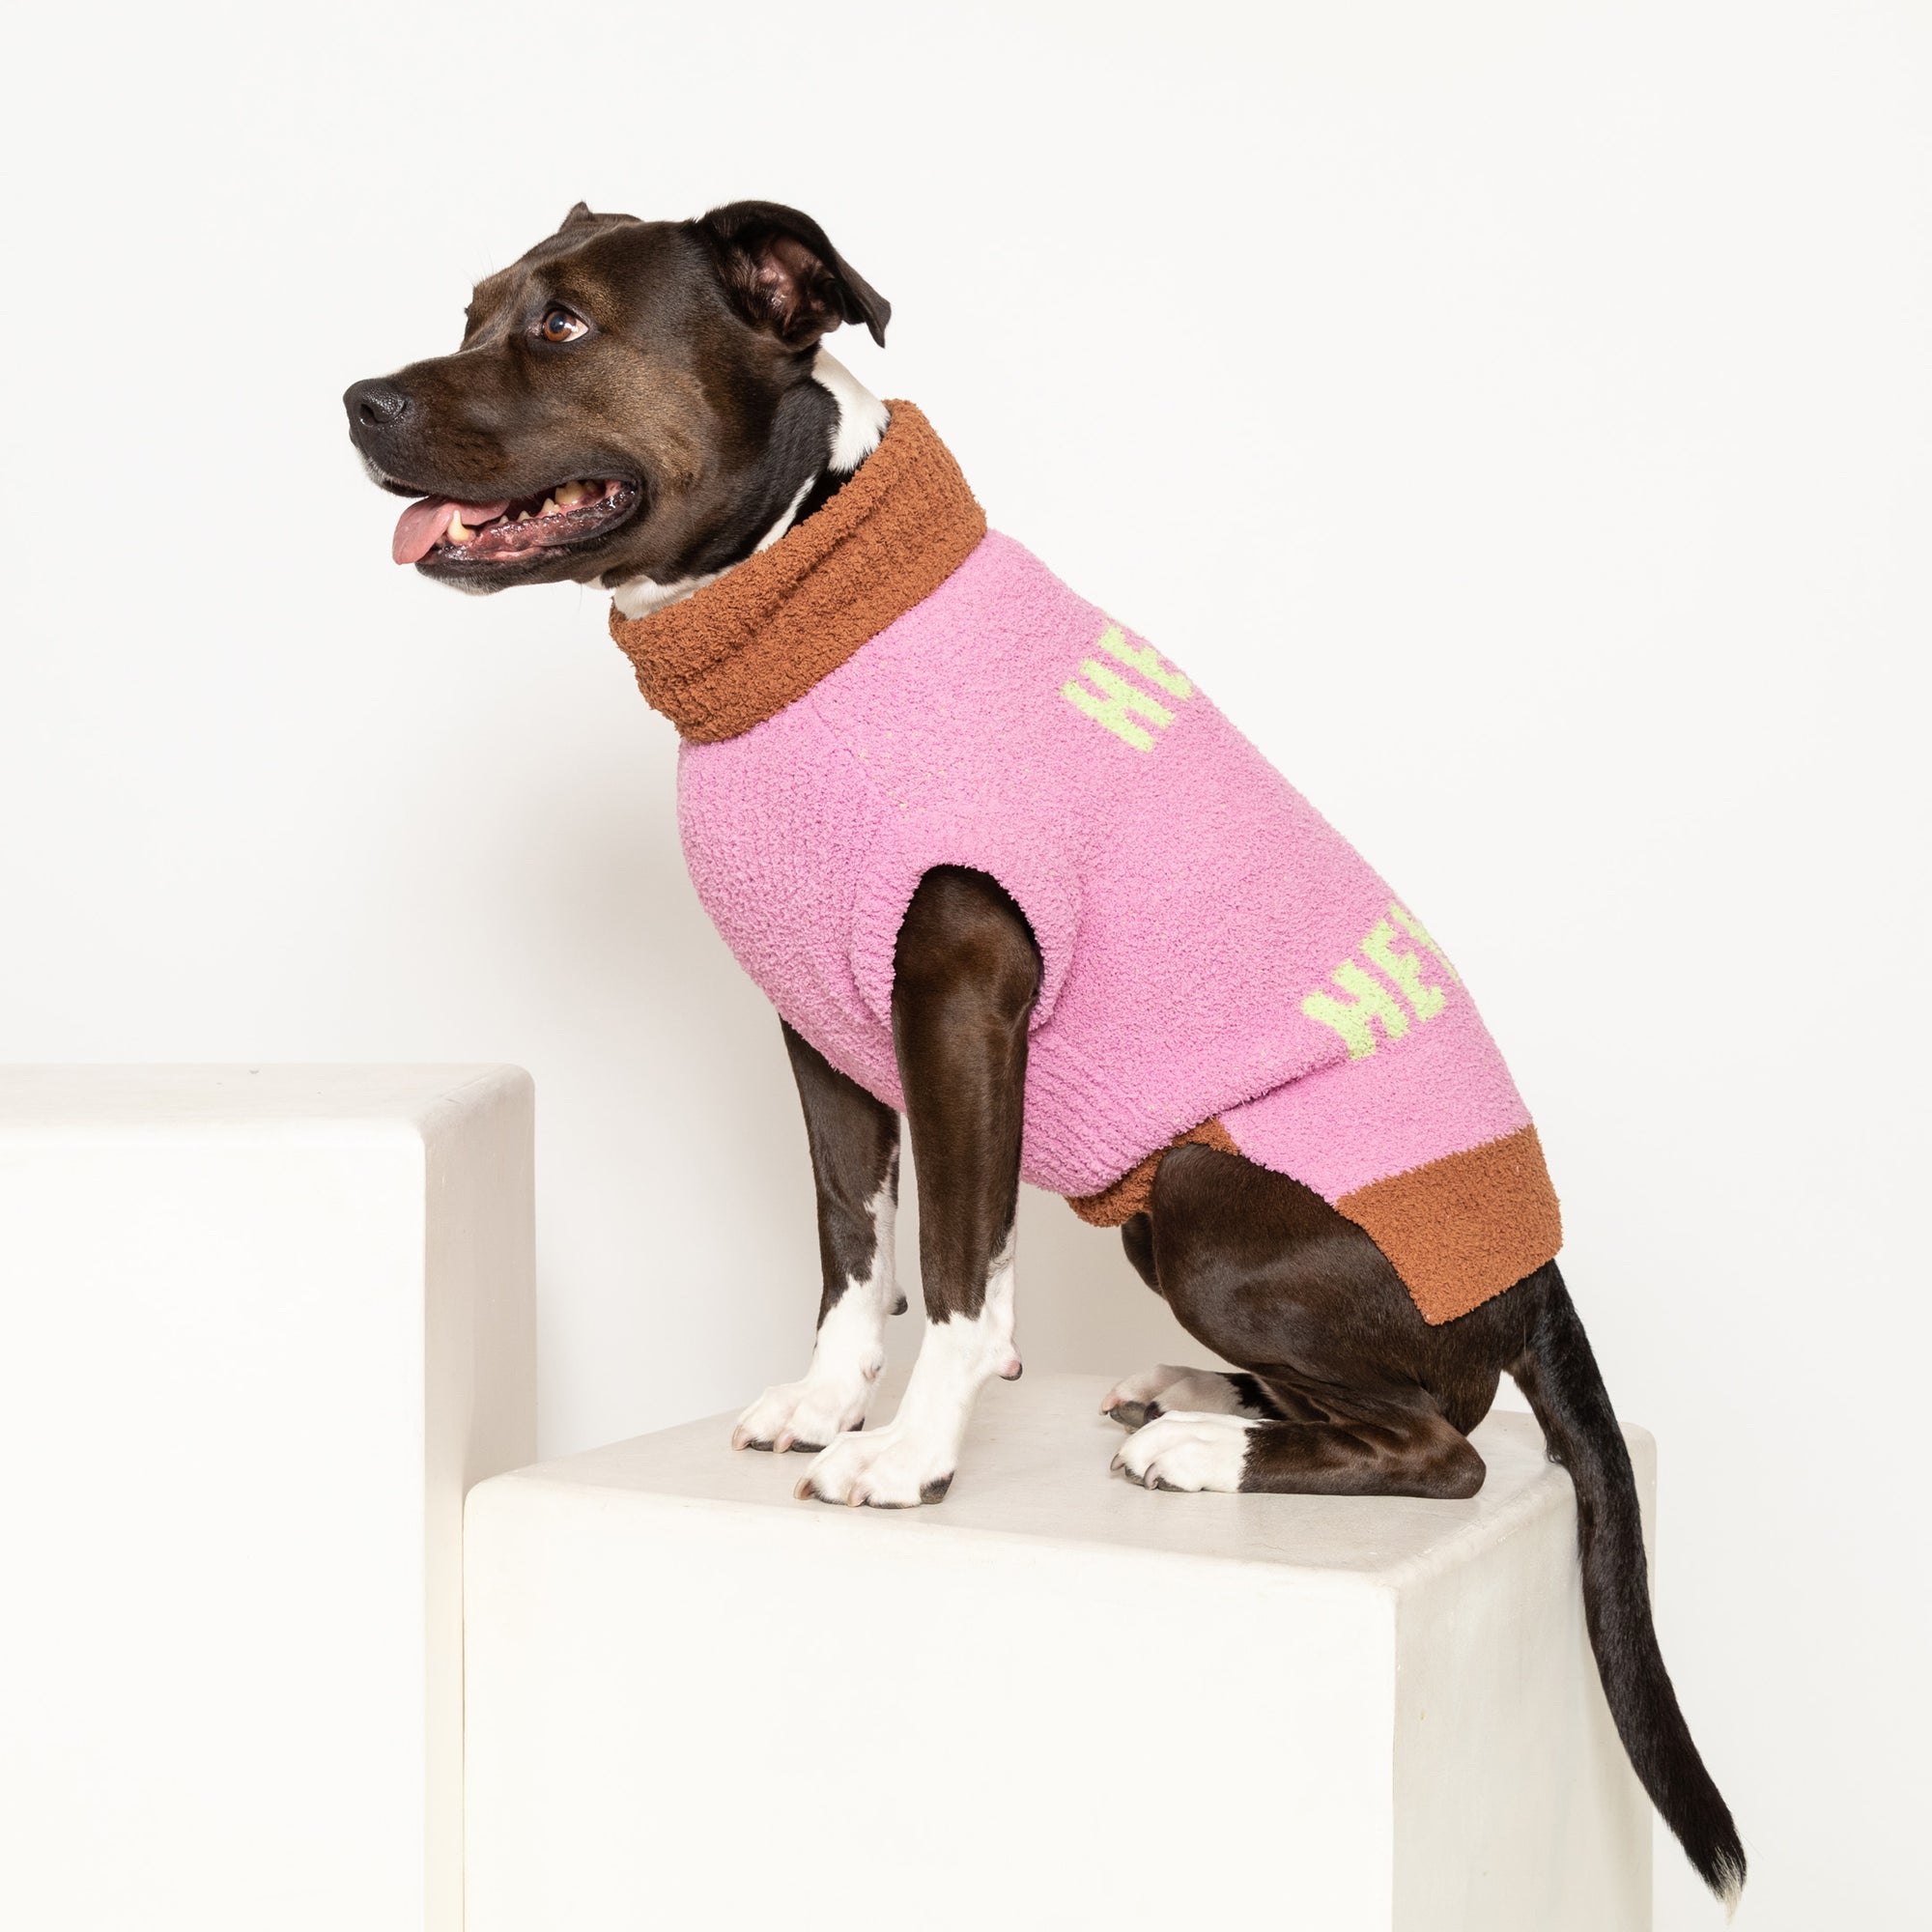  Brown and white dog in a pink "The Furryfolks" Hey sweater, perched on a white ledge, looking right.